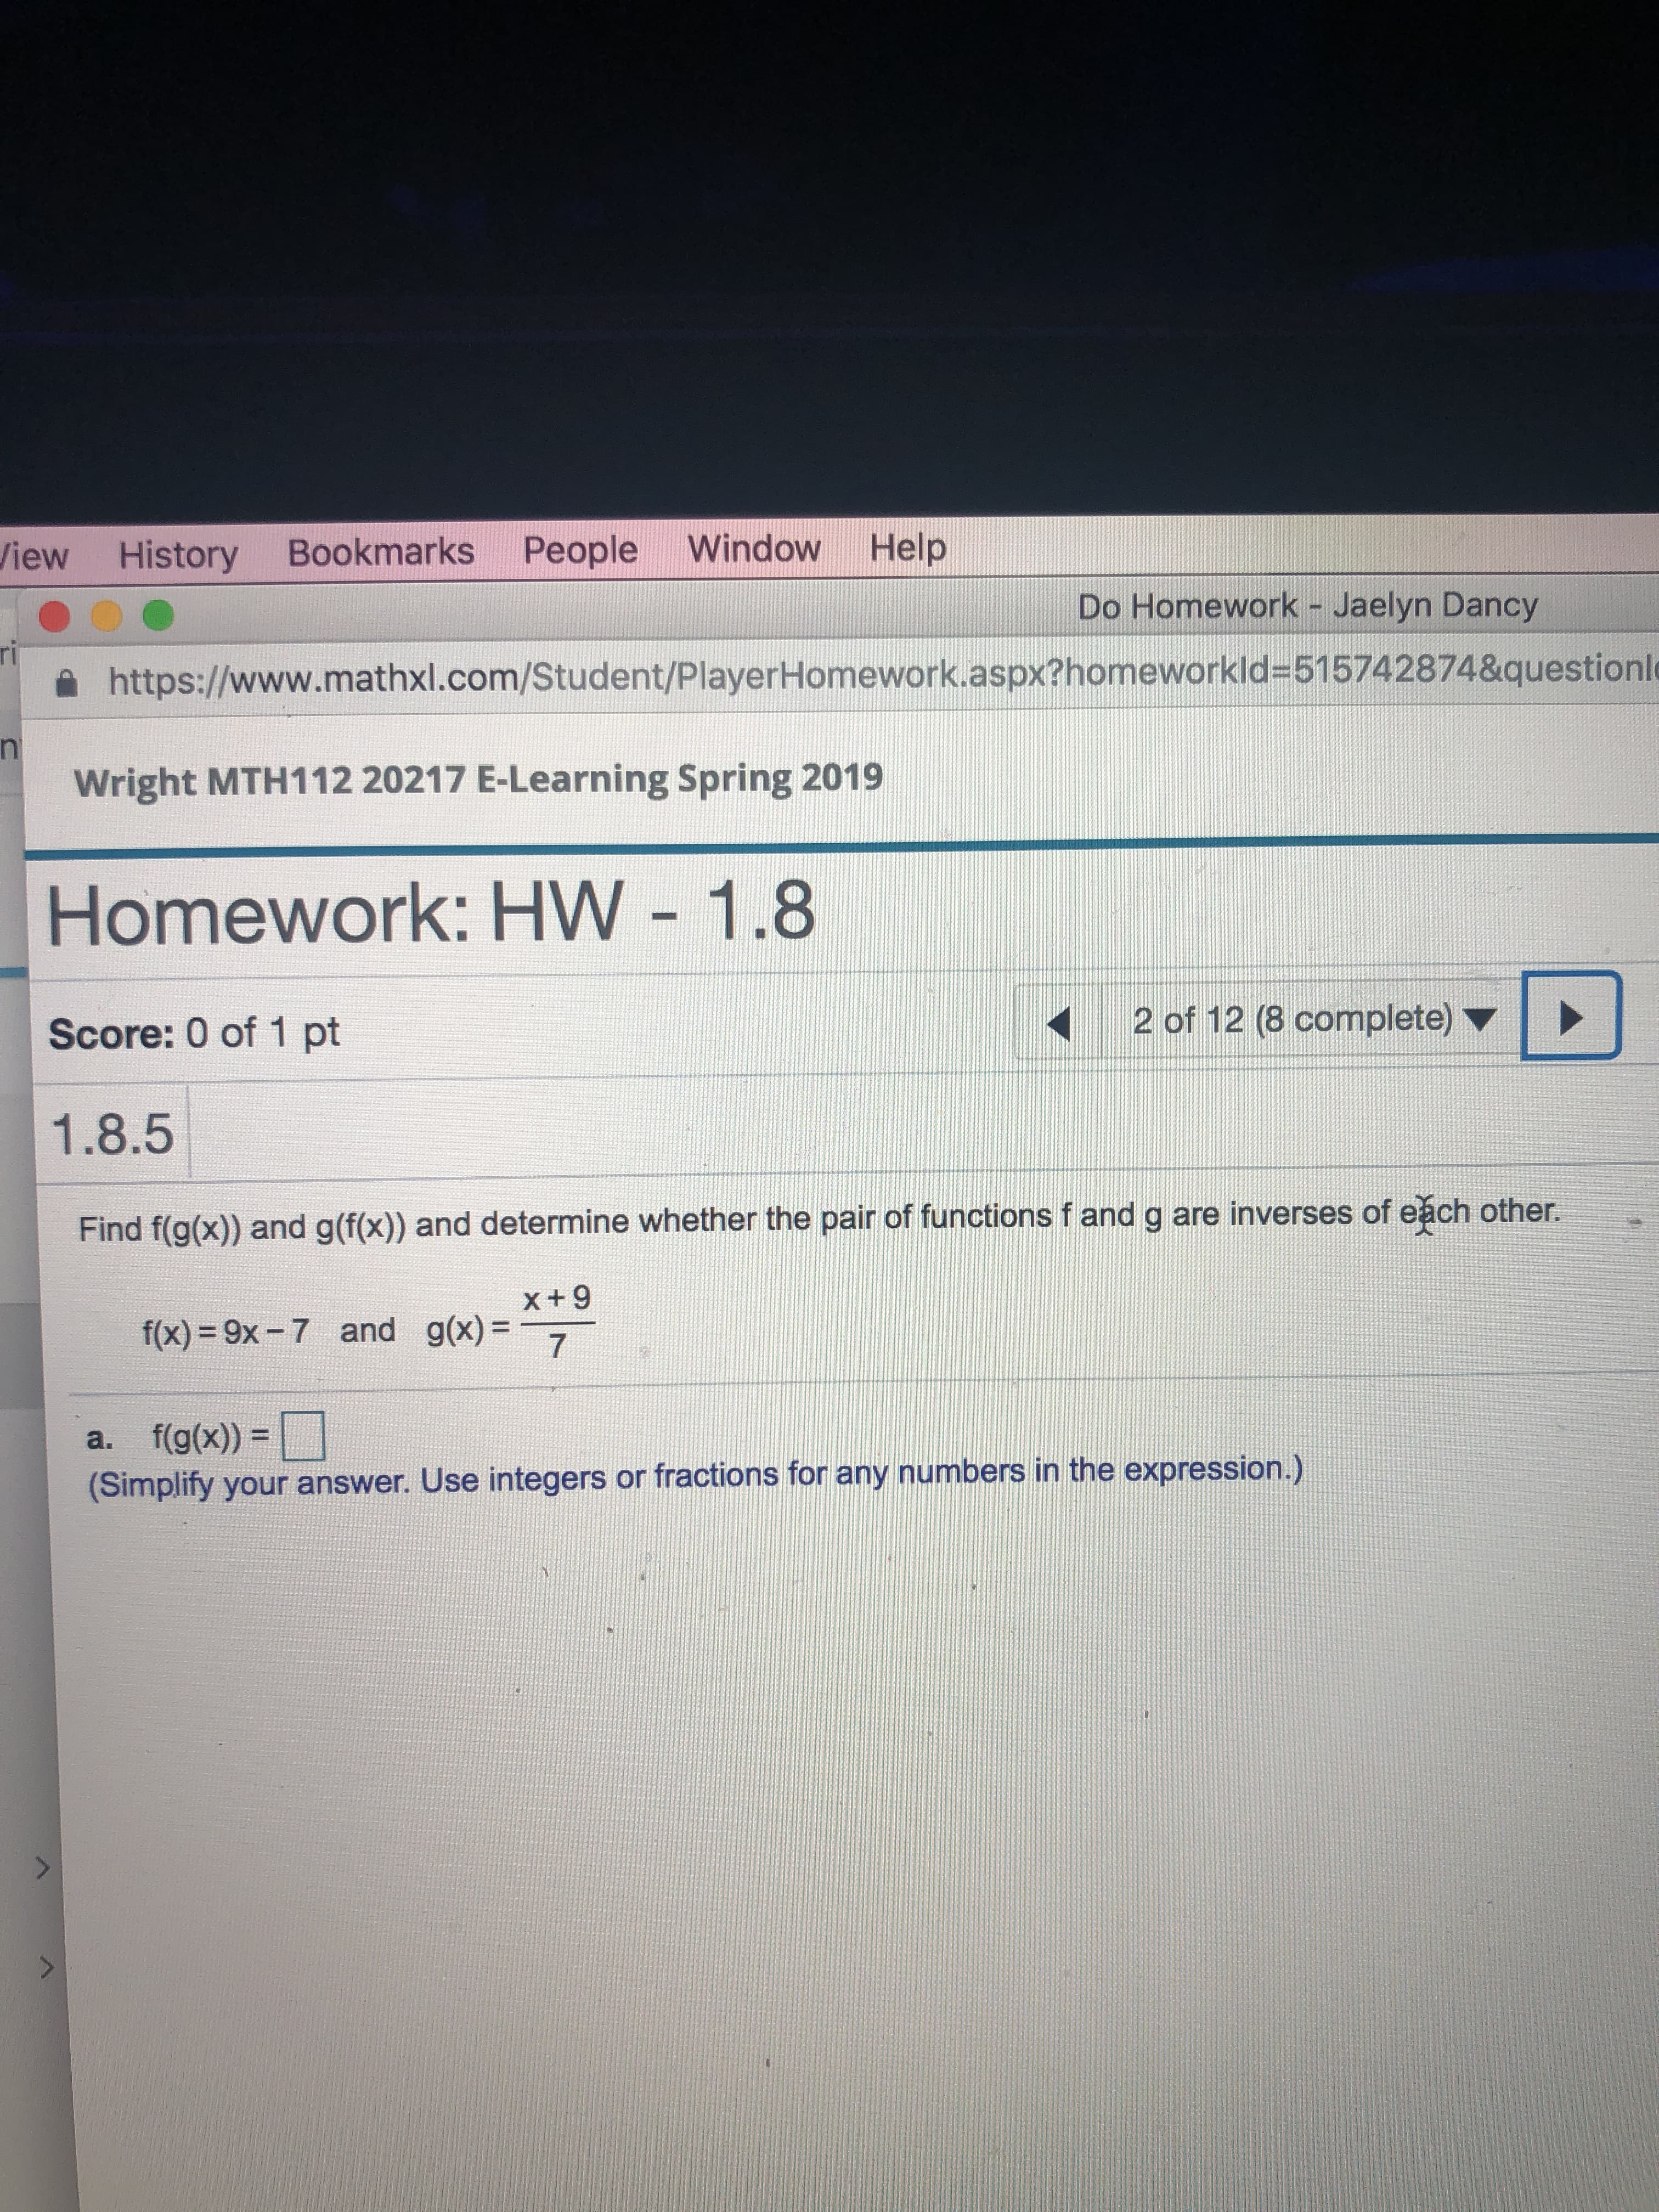 History Bookmarks People Window Help
을 https://www.mathxl.com/Student/PlayerHomework.aspx?homeworkId-515742874&questioni
Wright MTH112 20217 E-Learning Spring 2019
Homework: HW - 1.8
Score: 0 of 1 pt
1.8.5
Find f(gox) and g(fx) and determine whether the pair of functions f and g are inverses of eğch other.
View
Do Homework - Jaelyn Dancy
rl
2 of 12 (8 complete)
x+9
g(x)=-7-
f(x) = 9x-7
and
a. f(g(x))-U
(Simplify your answer. Use integers or fractions for any numbers in the expression.)
